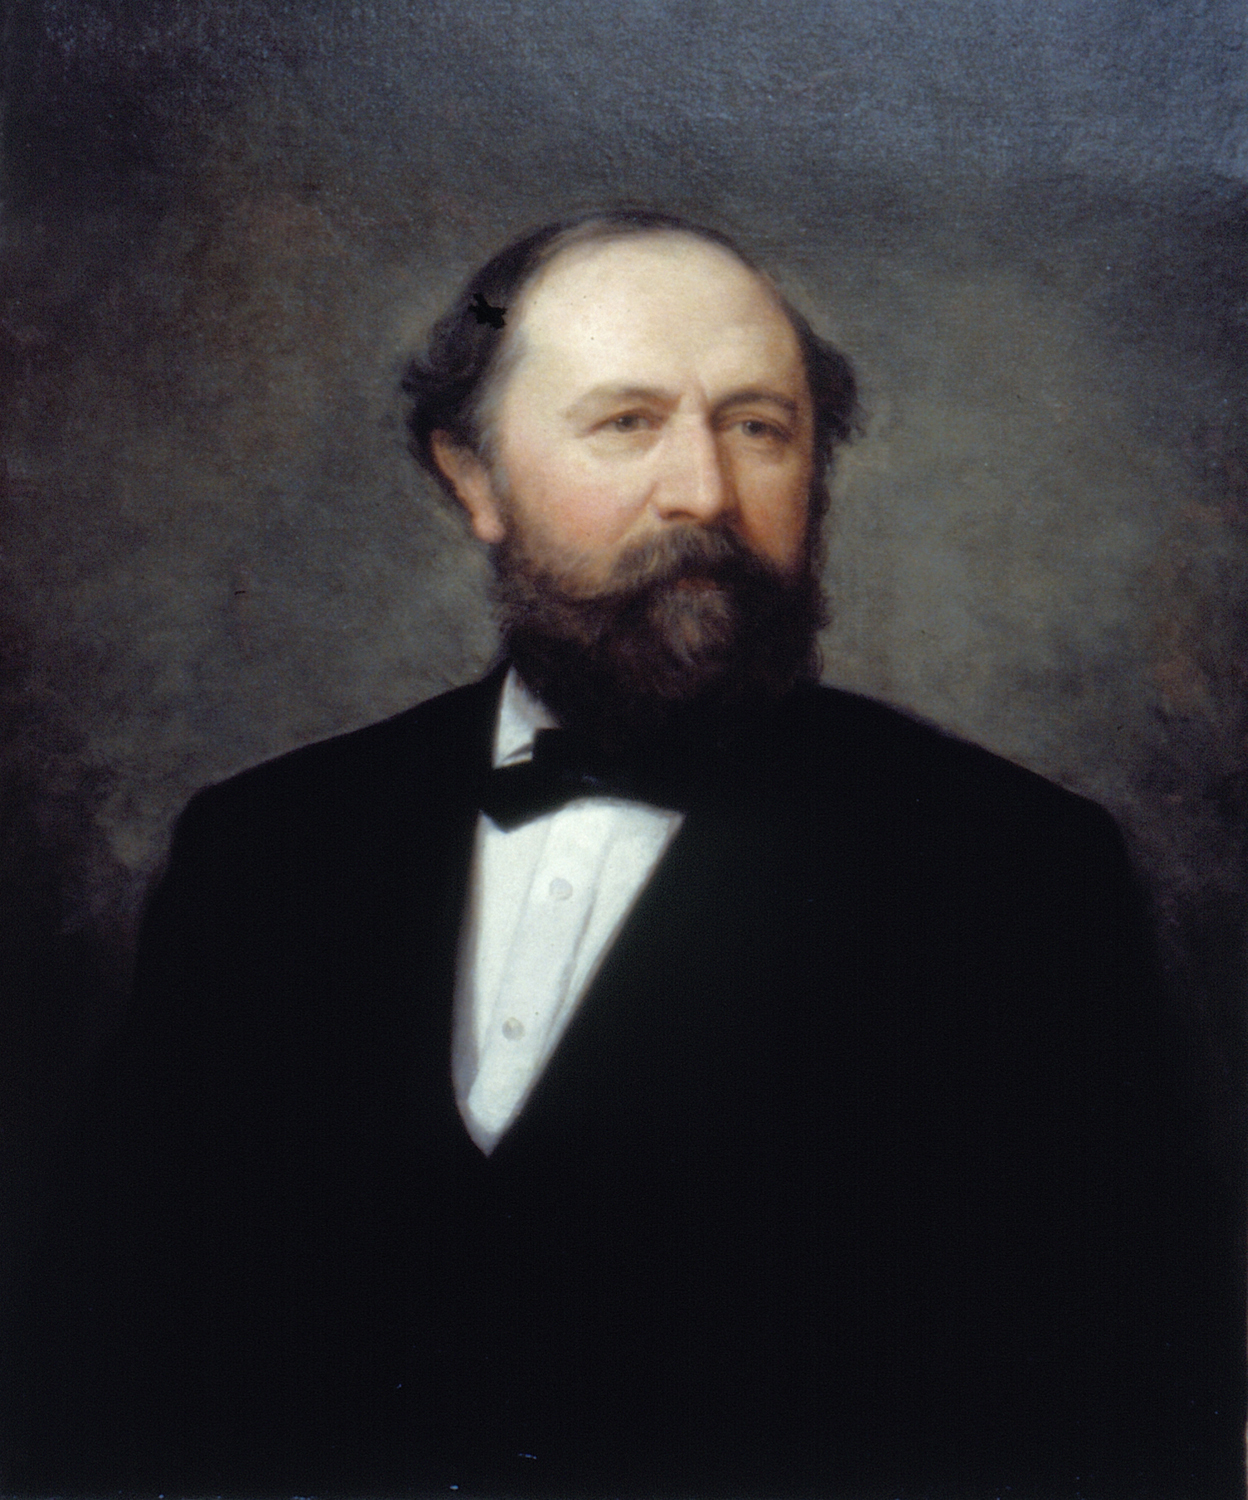 Henry A. Smythe, collector of customs for the Port of New York 1866-1869Herman Melville met Henry Smythe in Switzerland, which proved to be the means by which Melville finally managed to acquire a federal job in the New York Custom House. Smythe was appointed collector of customs for the collection district of New York on May 10, 1866. In lieu of obtaining the usual political endorsements, Melville applied for a job directly to Smythe, and he was rewarded with an appointment as a customs inspector in the surveyor's office on Dec. 5, 1866. Accused of corruption, Smythe barely managed to hold on to his collectorship and was forced out of office after four years, whereas Melville toiled on the piers for 19 years until his retirement in 1885.